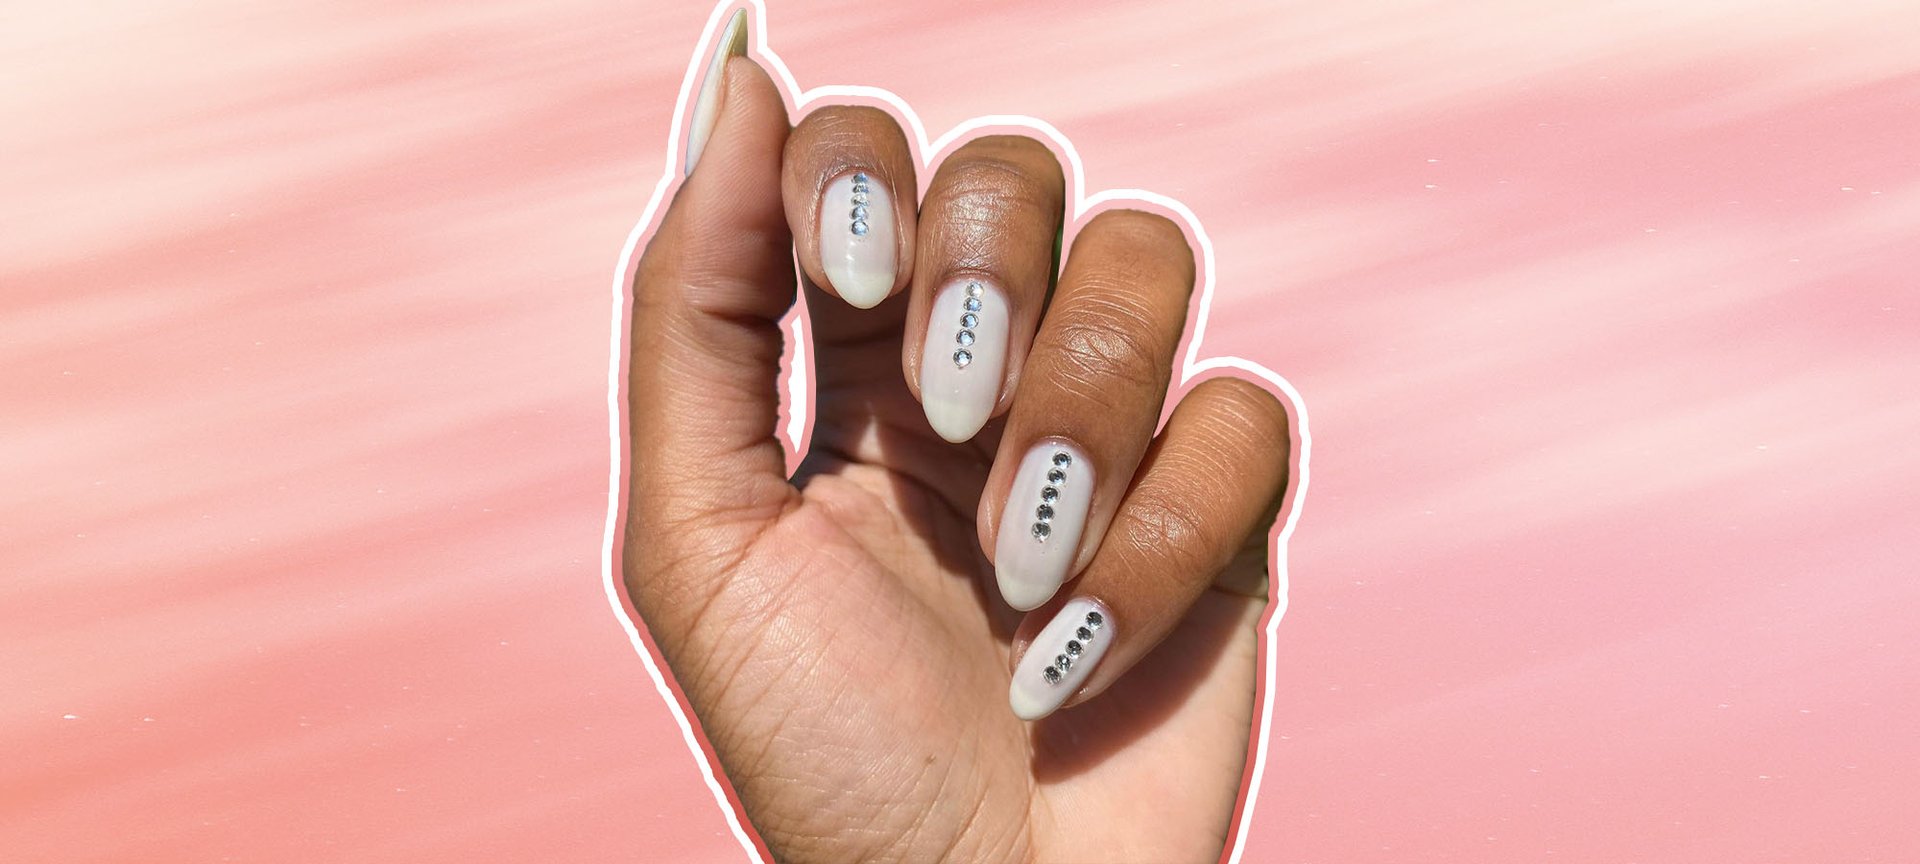 Most Elegant Nail Art Trends to Look Out for in 2022 | by Style In Mood! |  Medium